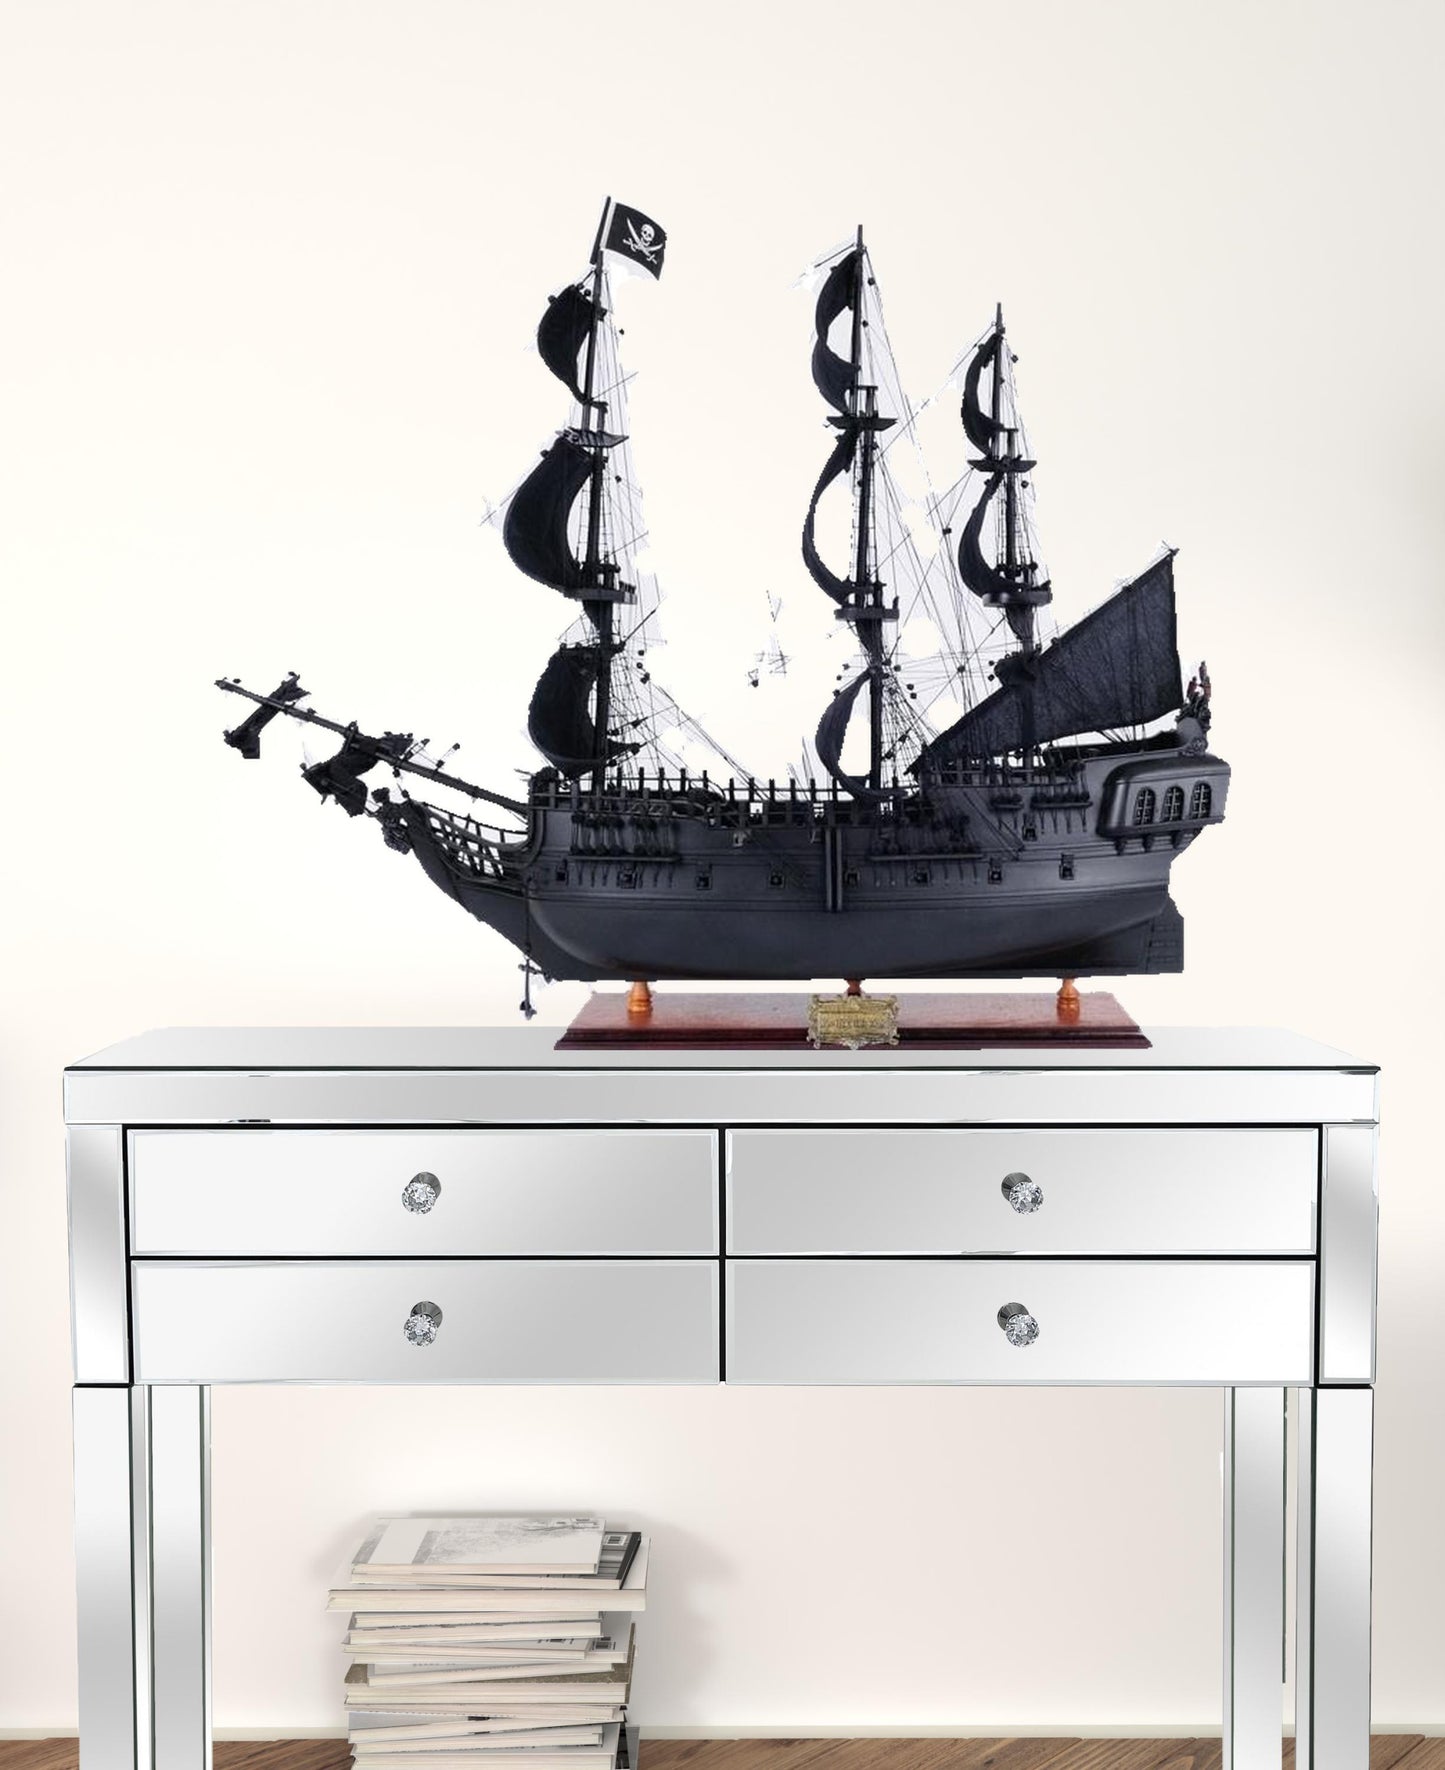 29" Black Black Pearl Pirate Boat Hand Painted Decorative Boat